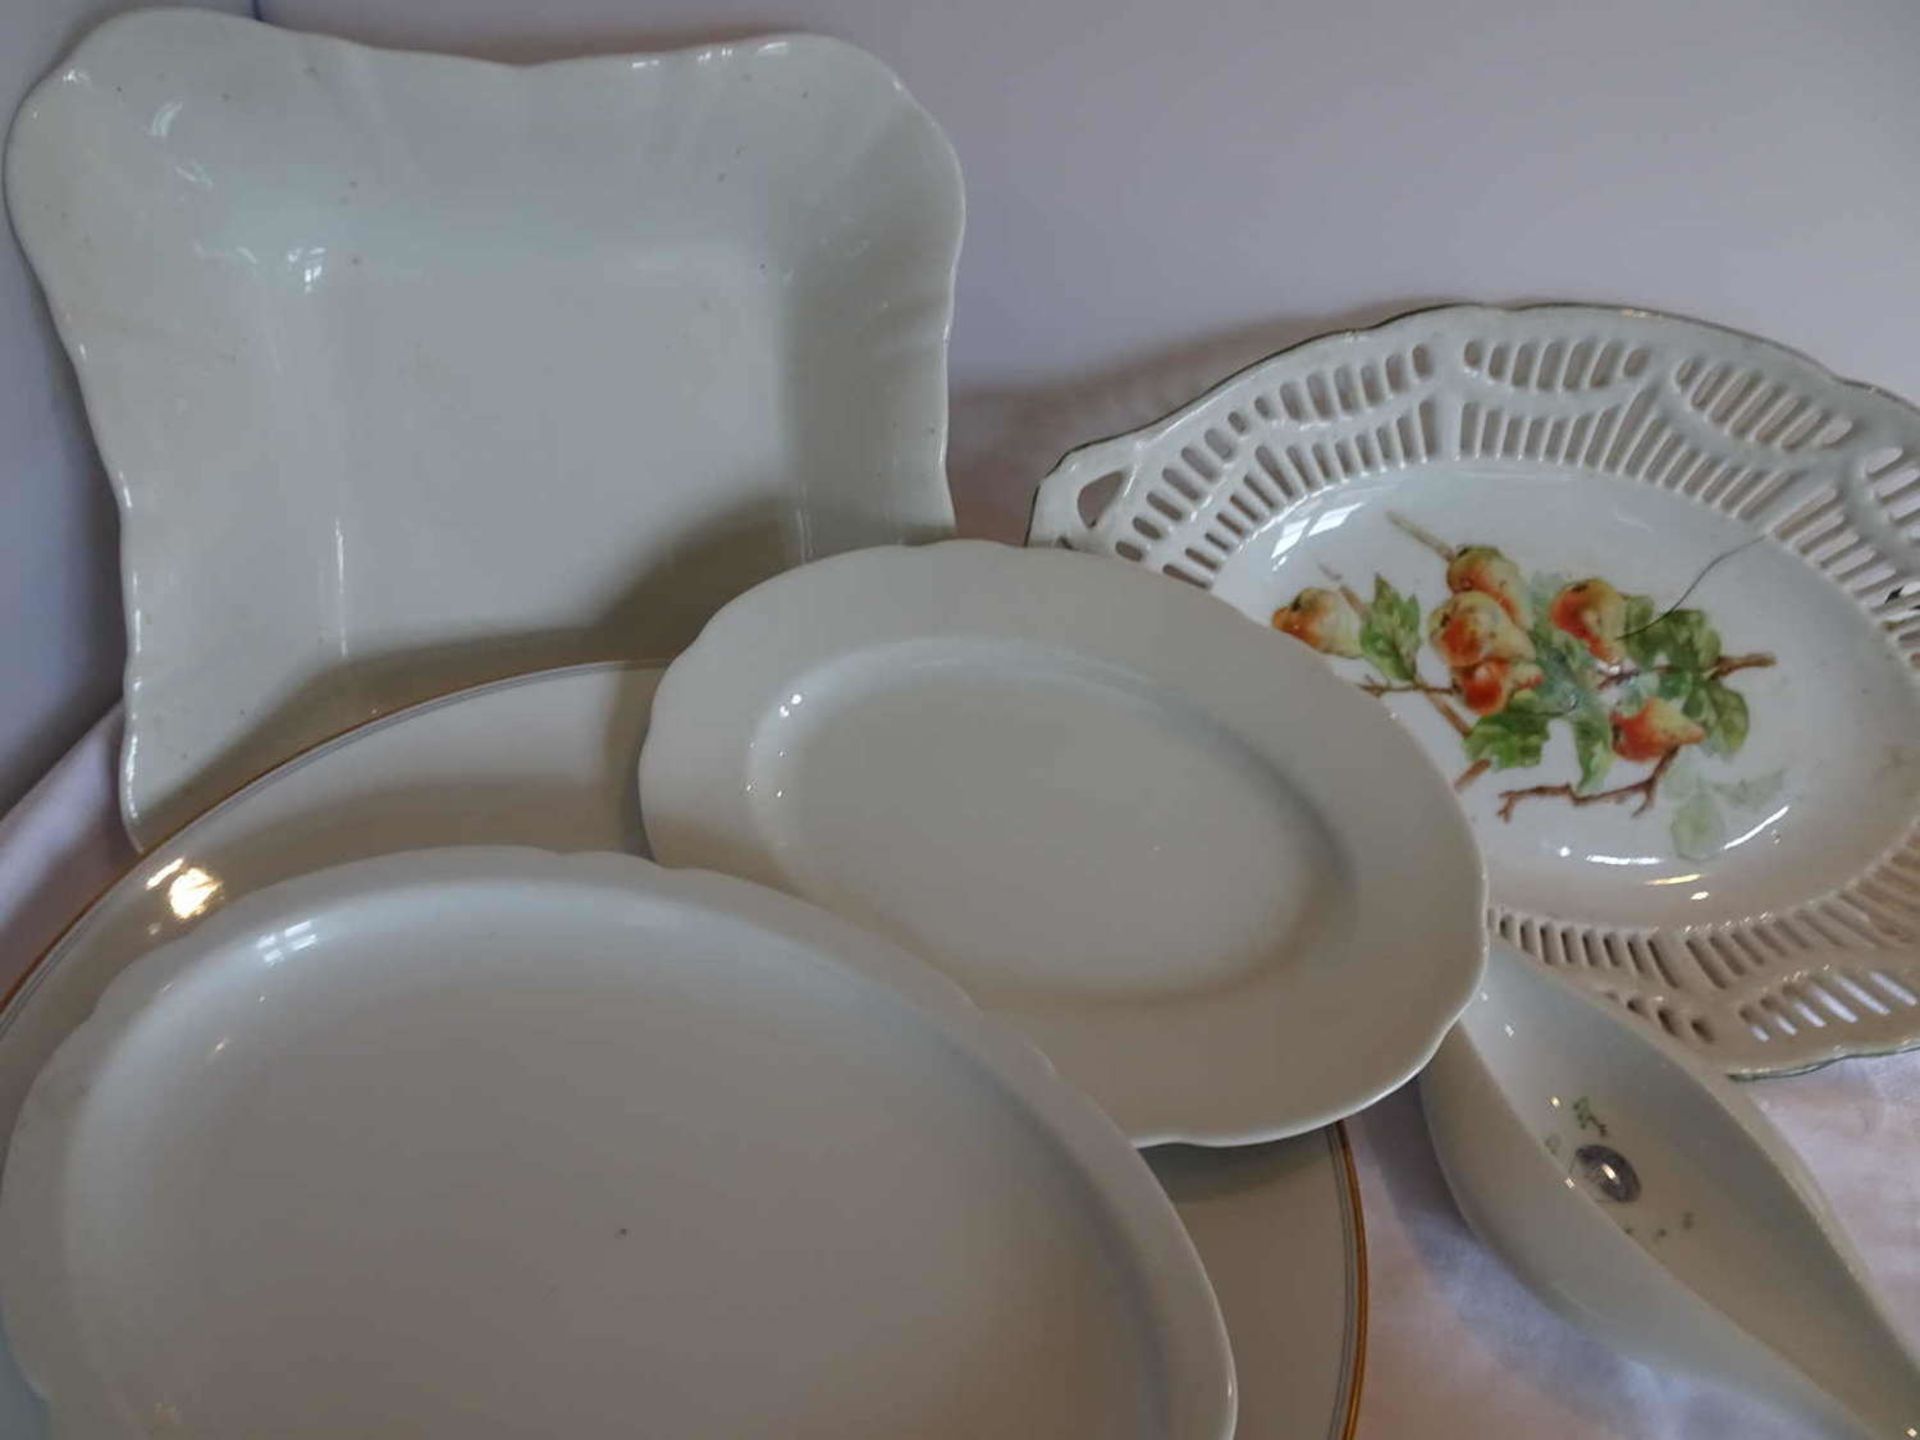 Lot of porcelain dishes from household dissolution, including Villeroy & Boch Mettlach, Rosenthal, - Bild 2 aus 2